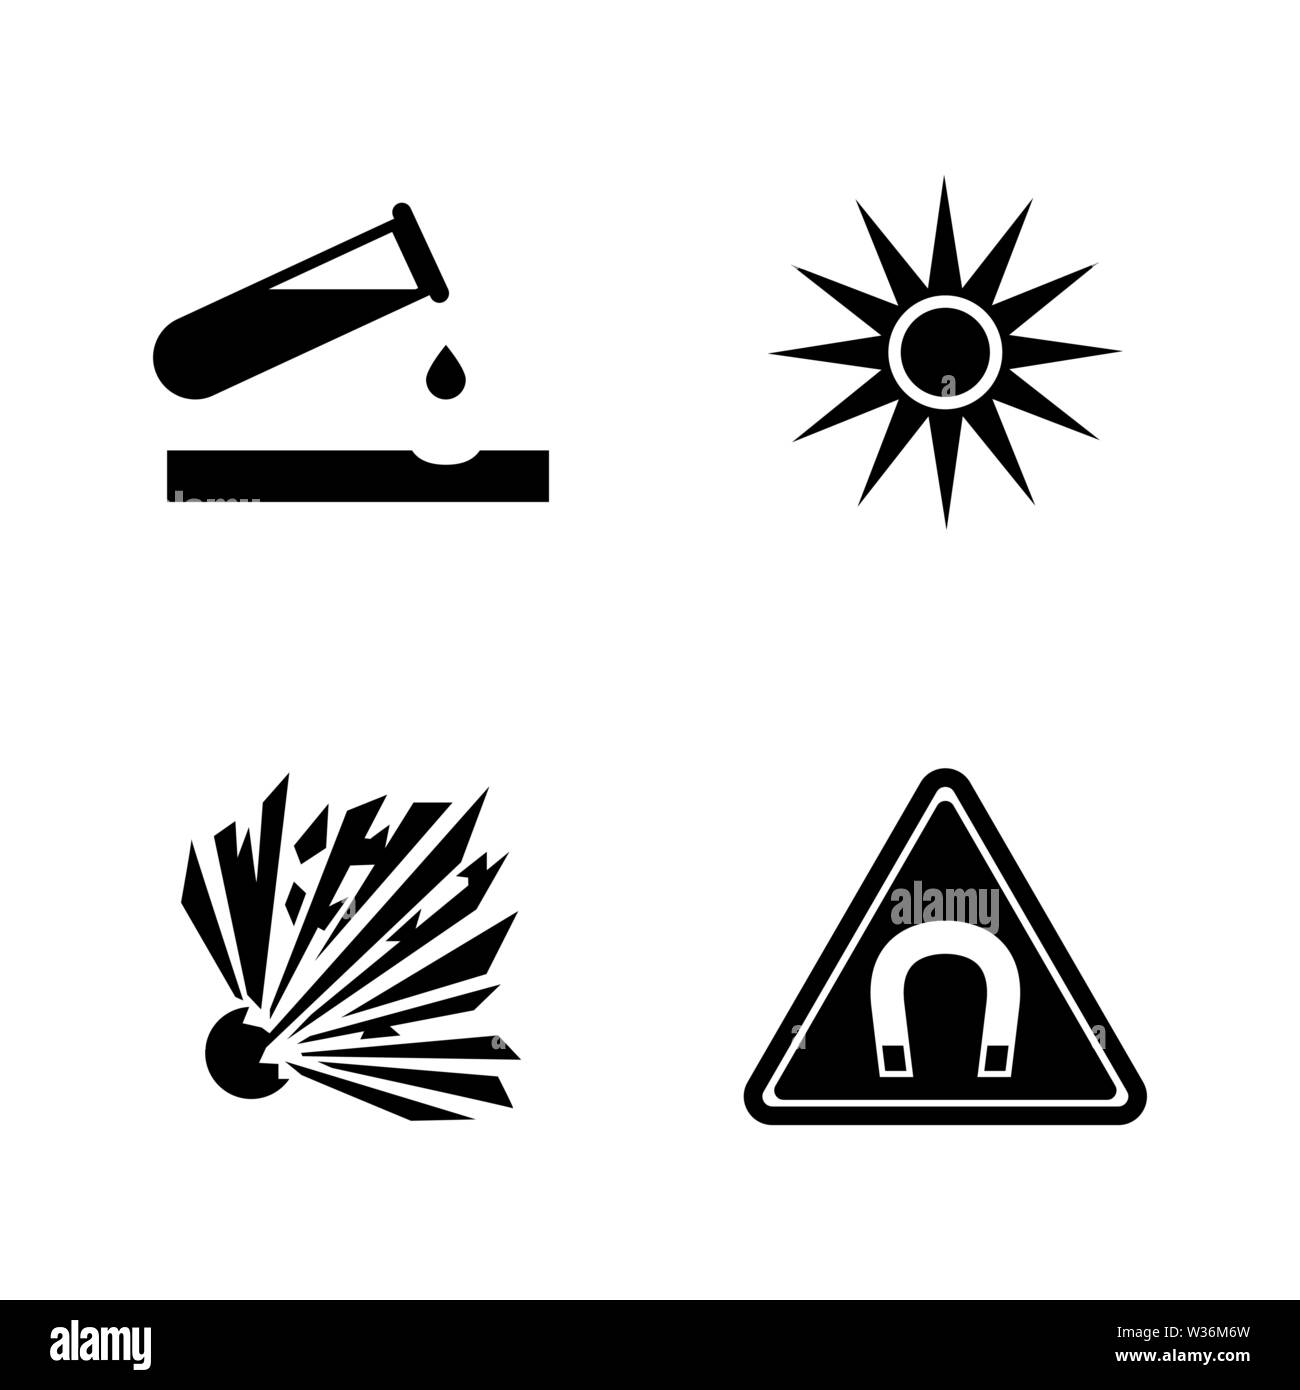 Danger, Attention, Hazard. Simple Related Vector Icons Set for Video, Mobile Apps, Web Sites, Print Projects and Your Design. Danger, Attention, Hazar Stock Vector